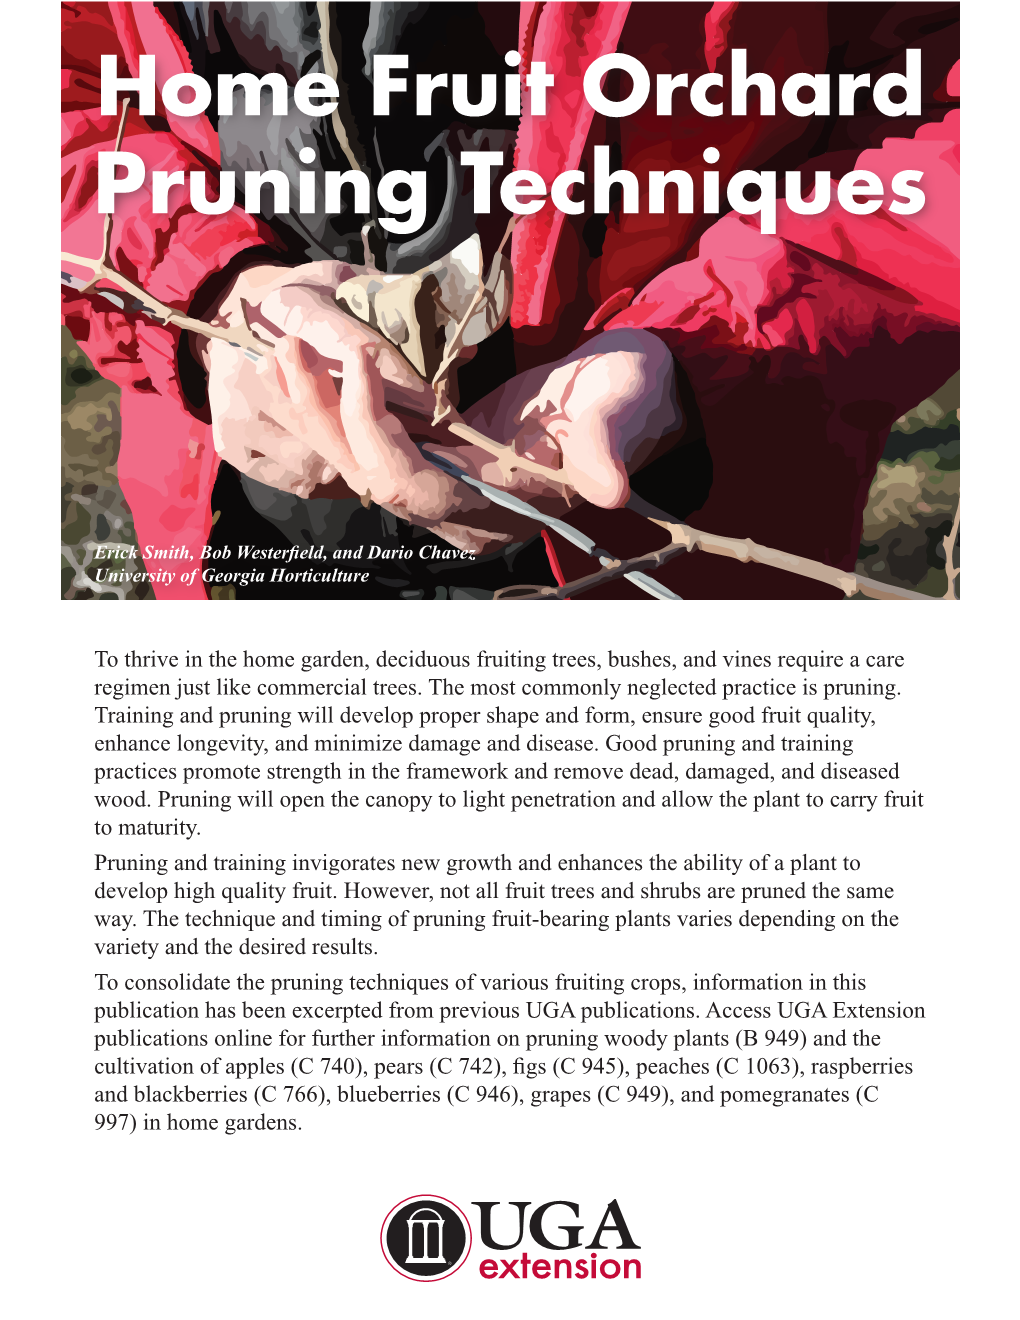 Home Fruit Orchard Pruning Techniques